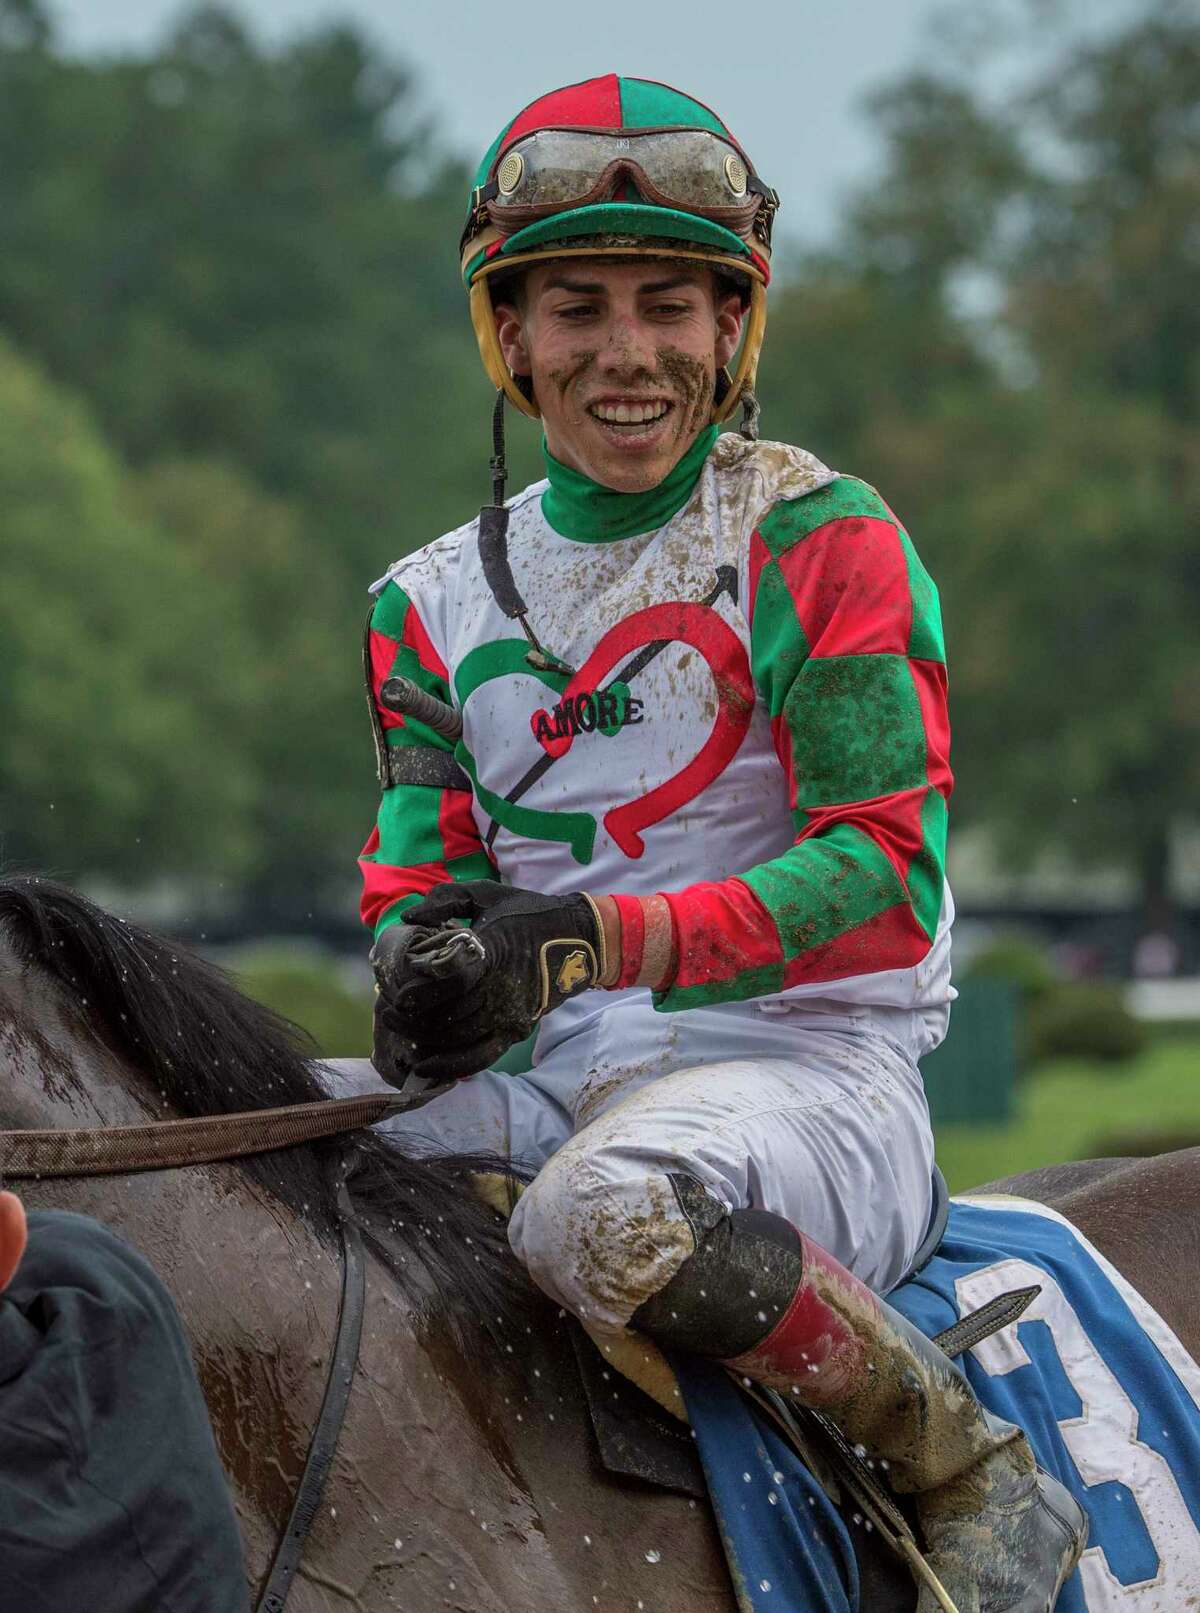 Jockey Irad Ortiz Jr sits atop Firenze Fire and is all smiles after winning the 103rd running of The Sanford Saturday July 23, 2017 at the Saratoga Race Course in Springs, N.Y. (Skip Dickstein/Times Union)